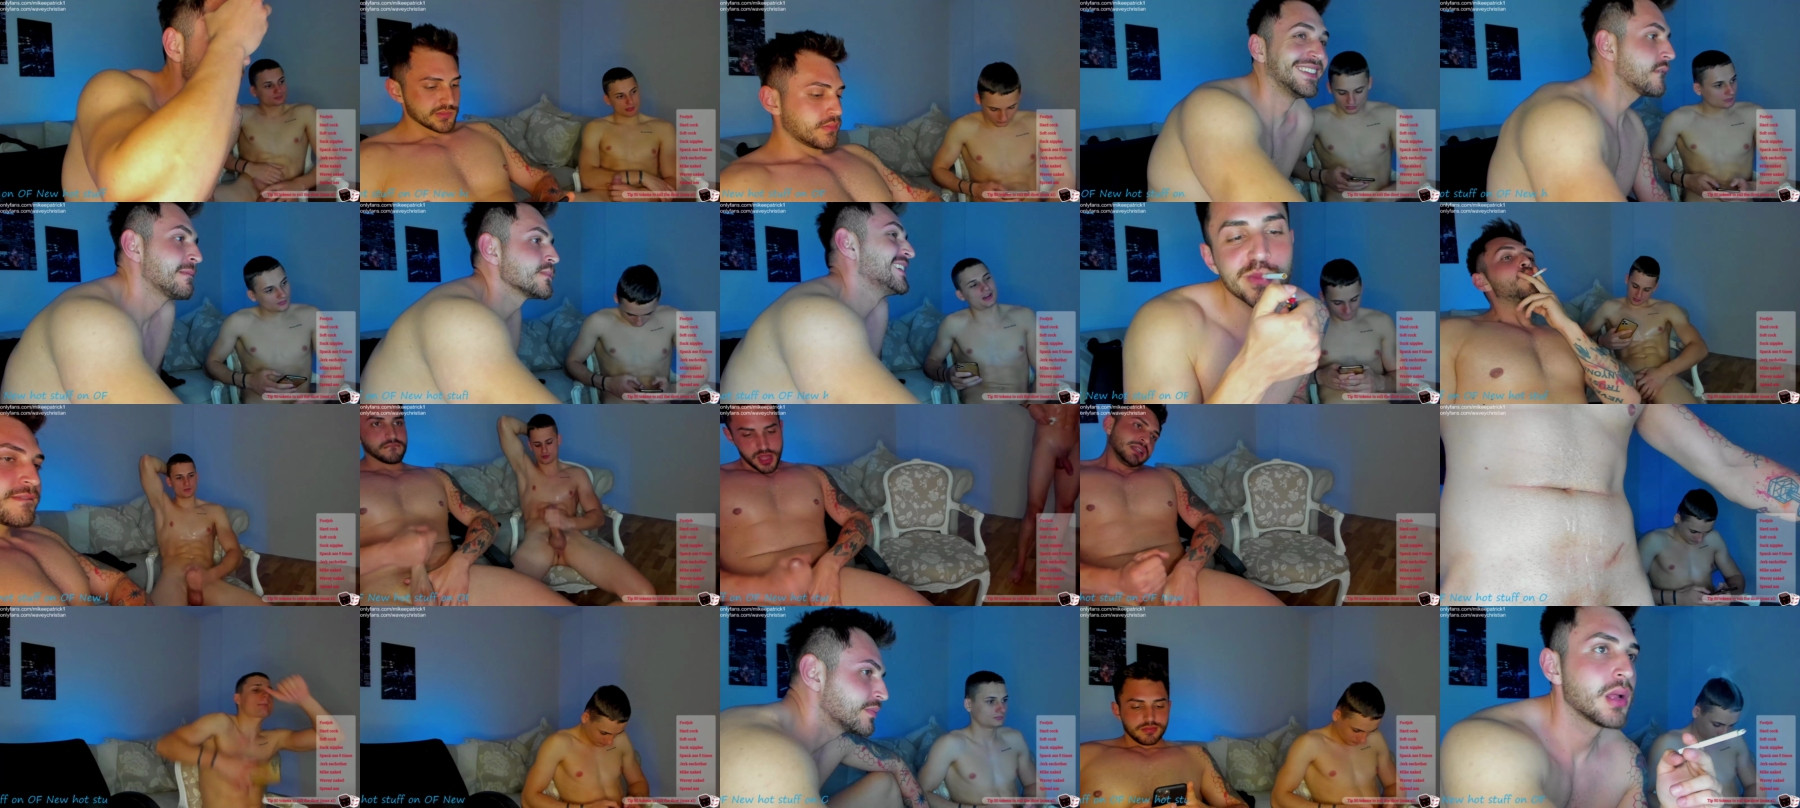 Mike_And_Wavey Cam CAM SHOW @ Chaturbate 08-05-2021